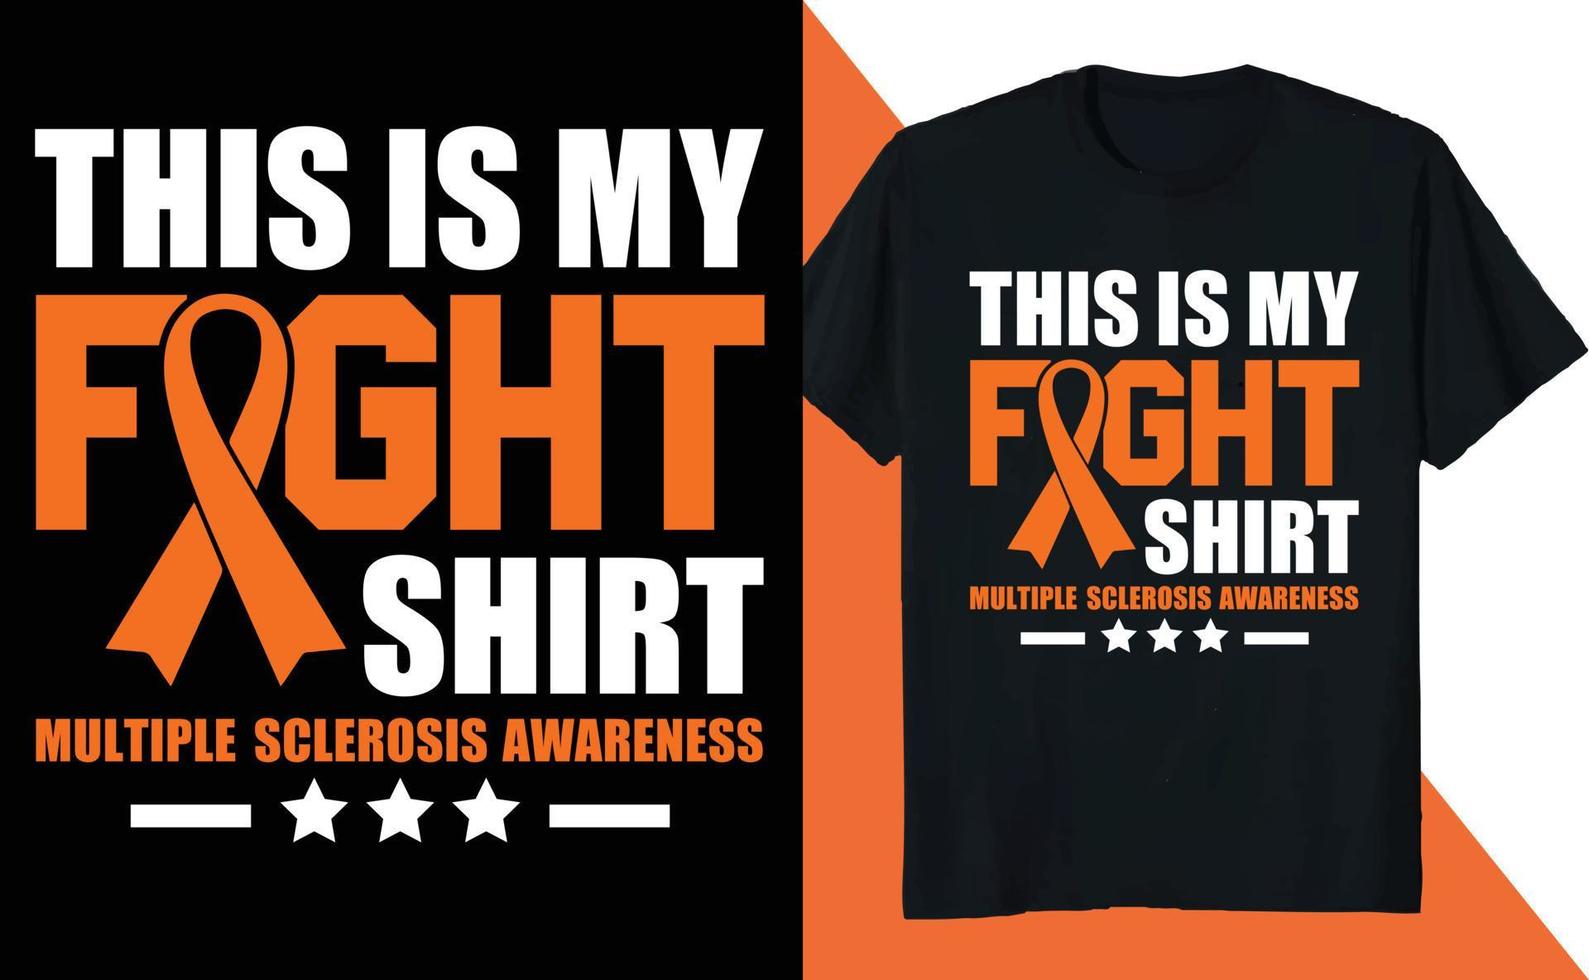 This is My Fight Shirt Multiple Sclerosis Awareness vector